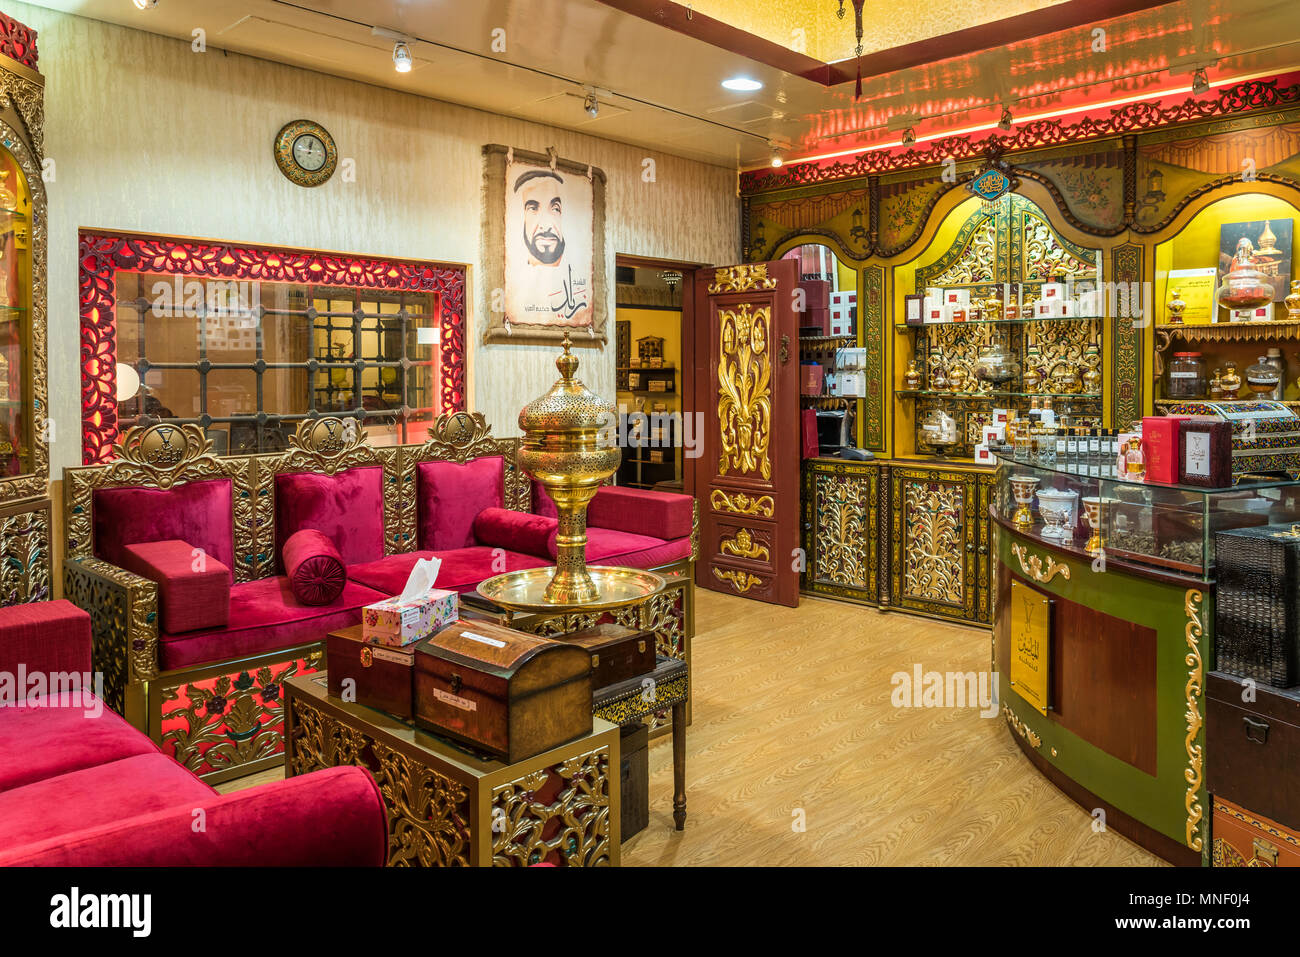 Interior of a furniture store in the souk market in the Wafi Shopping Center, Dubai, UAE, Middle ...